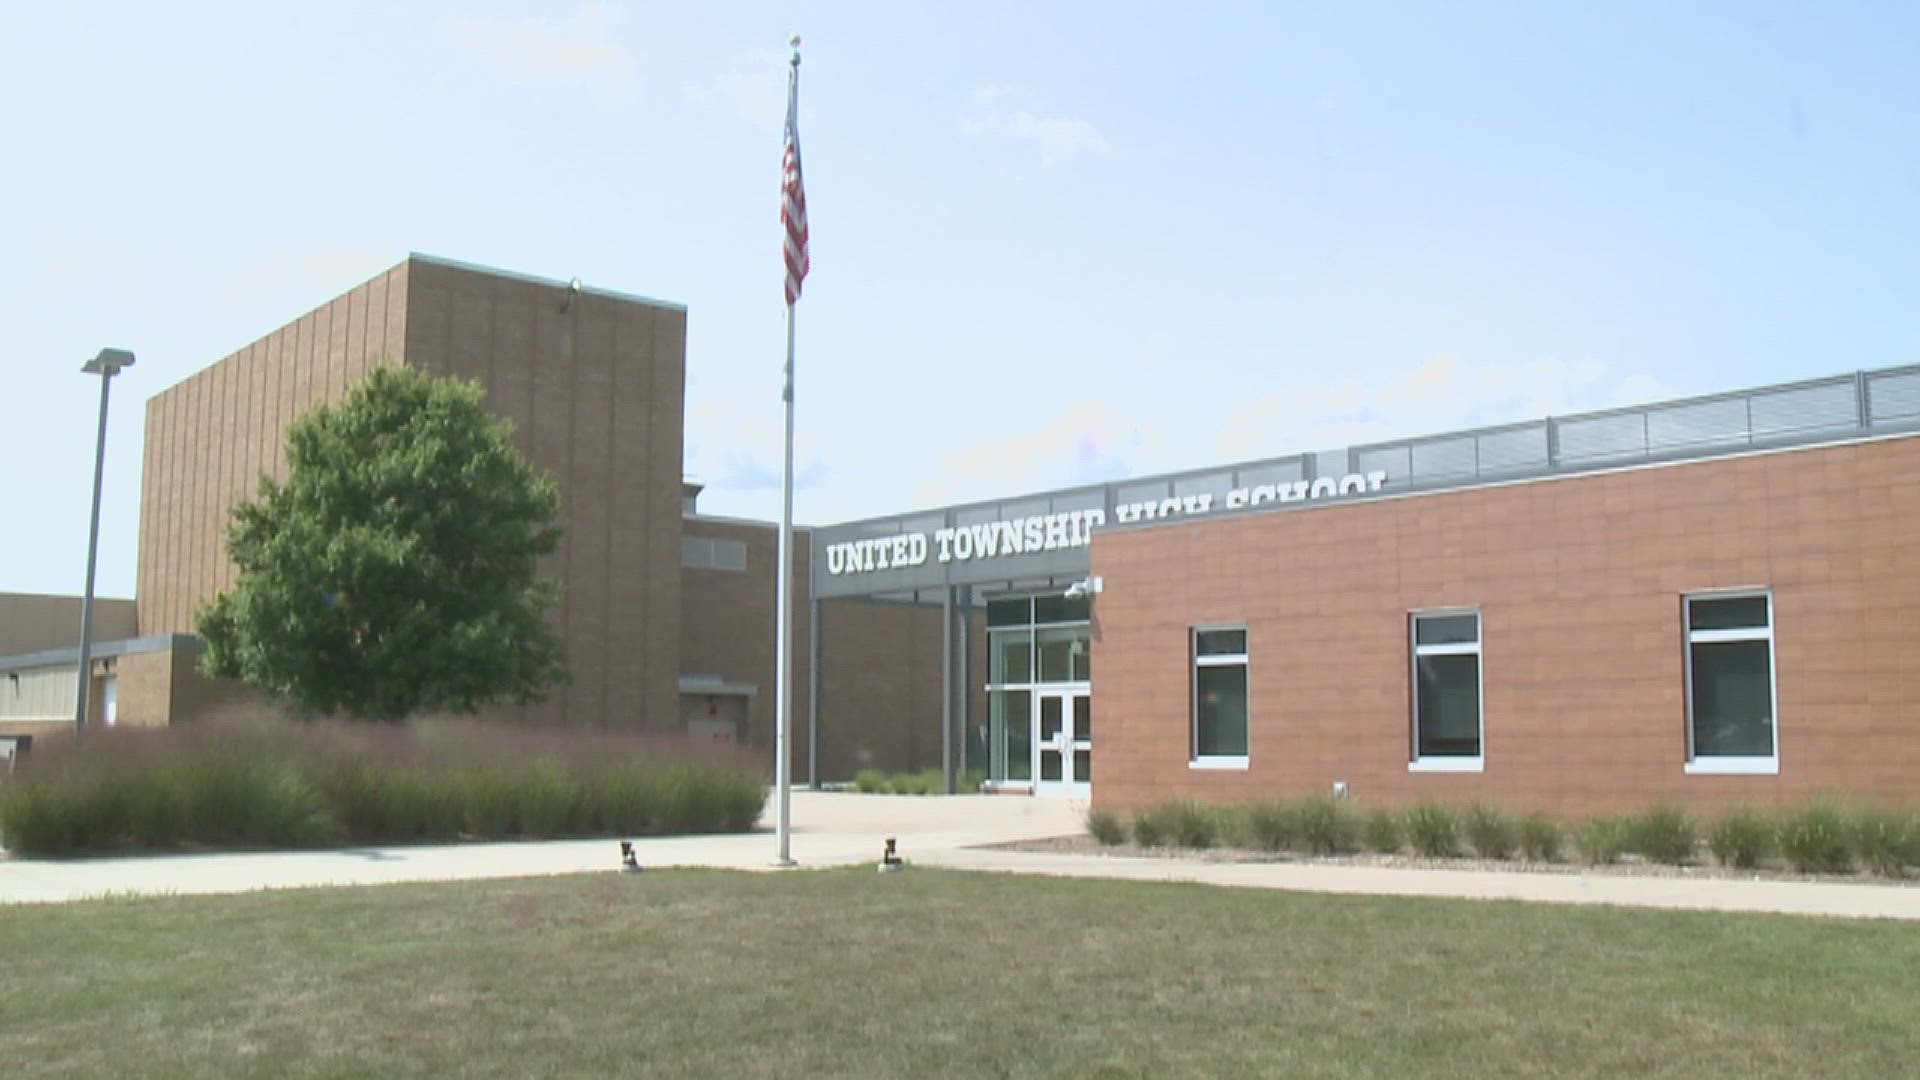 United Township School District started off its first day of school with the option of wearing masks for students then that changed by the end of the day.